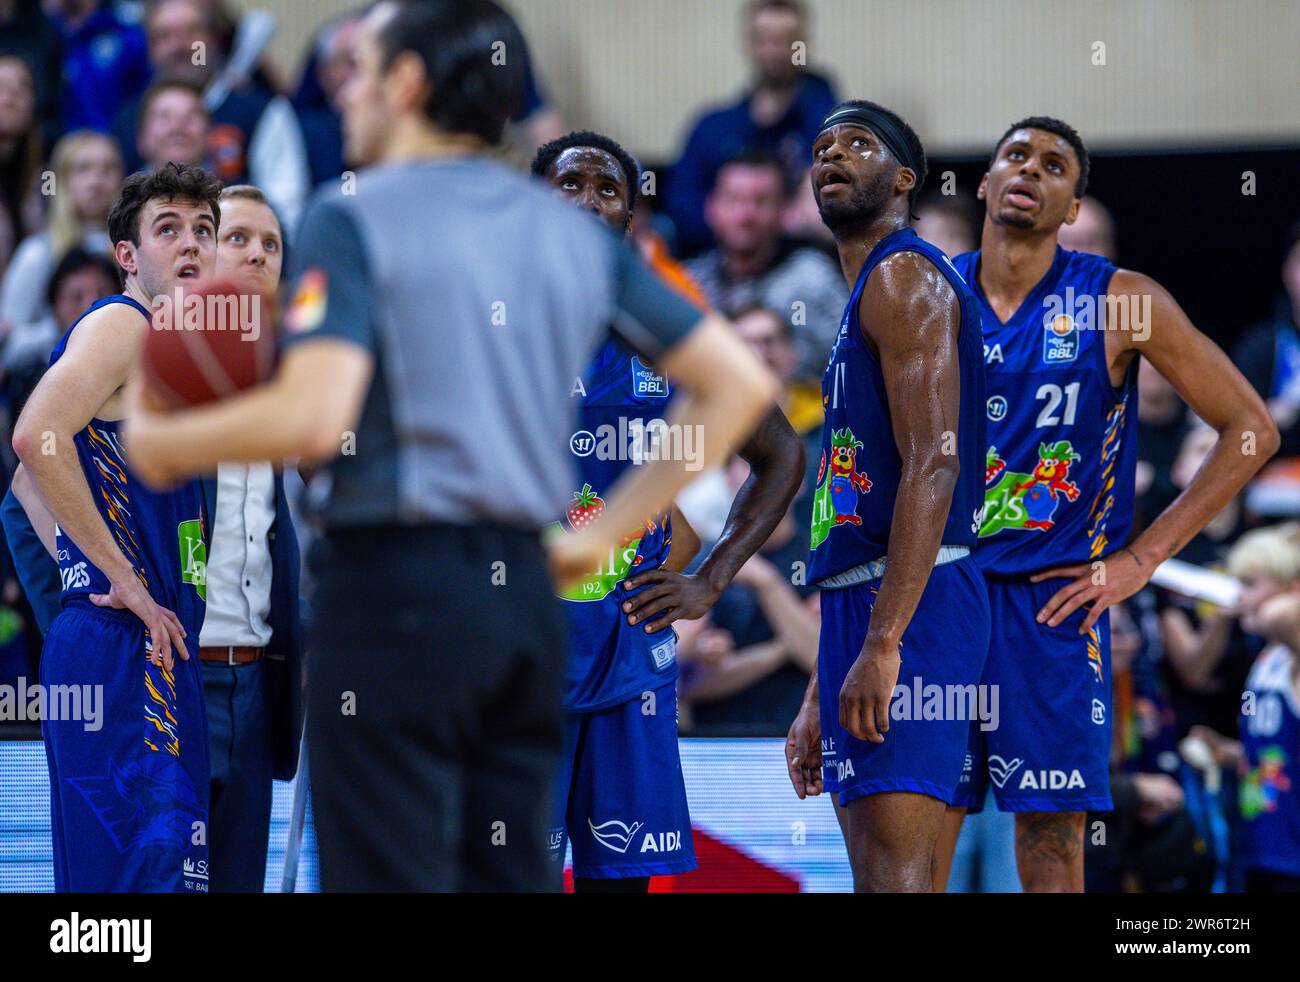 10 March 2024, Mecklenburg-Western Pomerania, Rostock: Basketball: Bundesliga, Rostock Seawolves - Alba Berlin, Main Round, Matchday 23, Stadthalle Rostock. The disappointed Rostock players Lester Medford (l), Derrick Alston Jr. (M) and Chevez Goodwin (r) after the end of the game. Photo: Jens Büttner/dpa Stock Photo